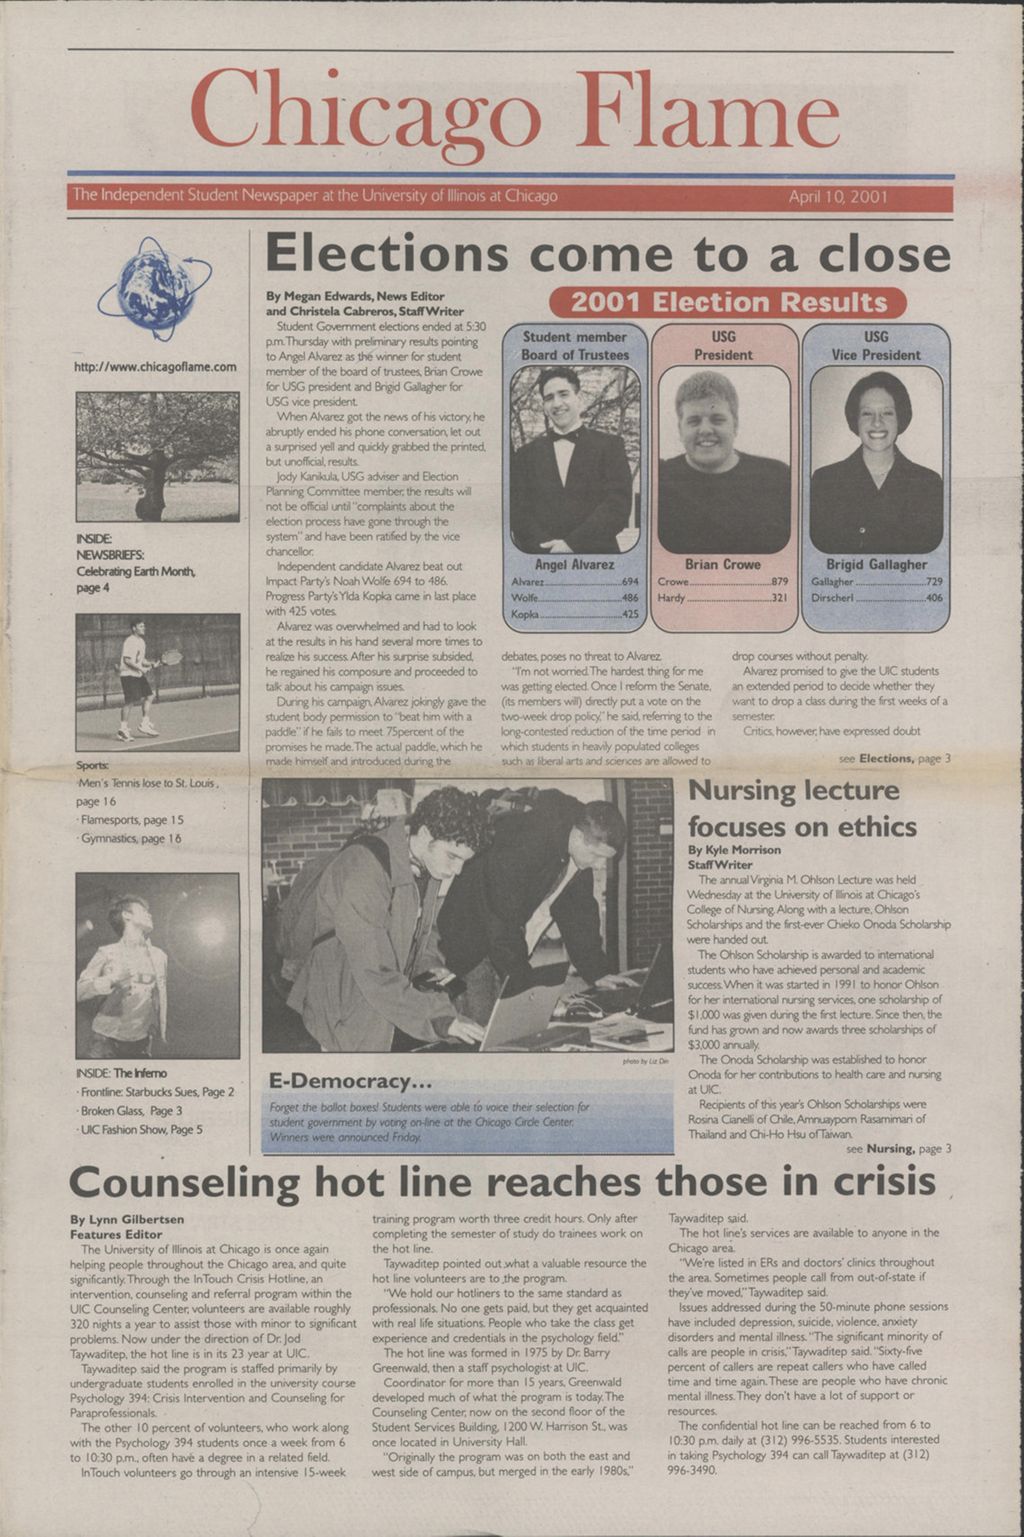 Chicago Flame (April 10, 2001)